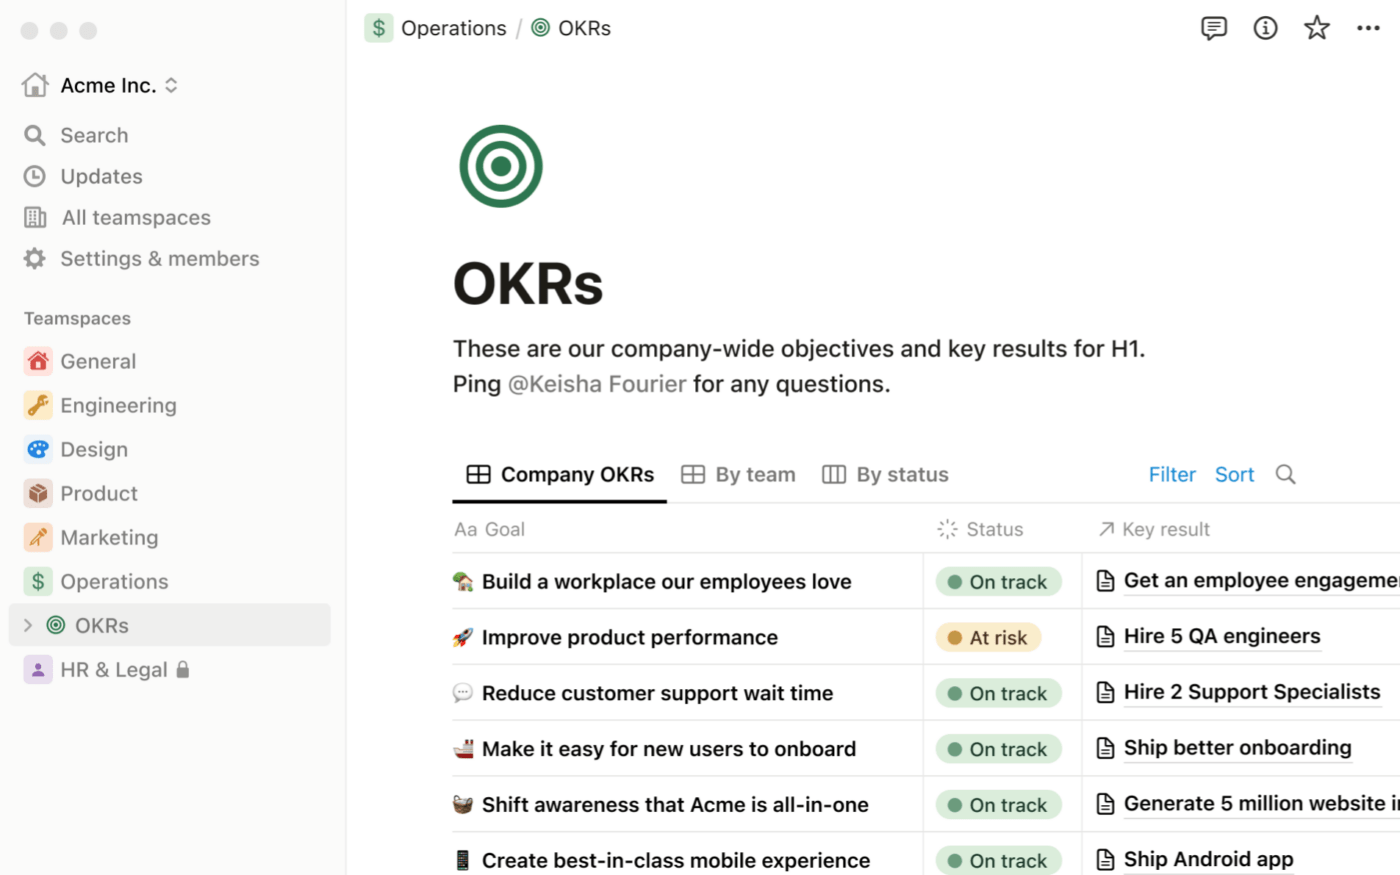 Using task management features in Notion to manage OKRs